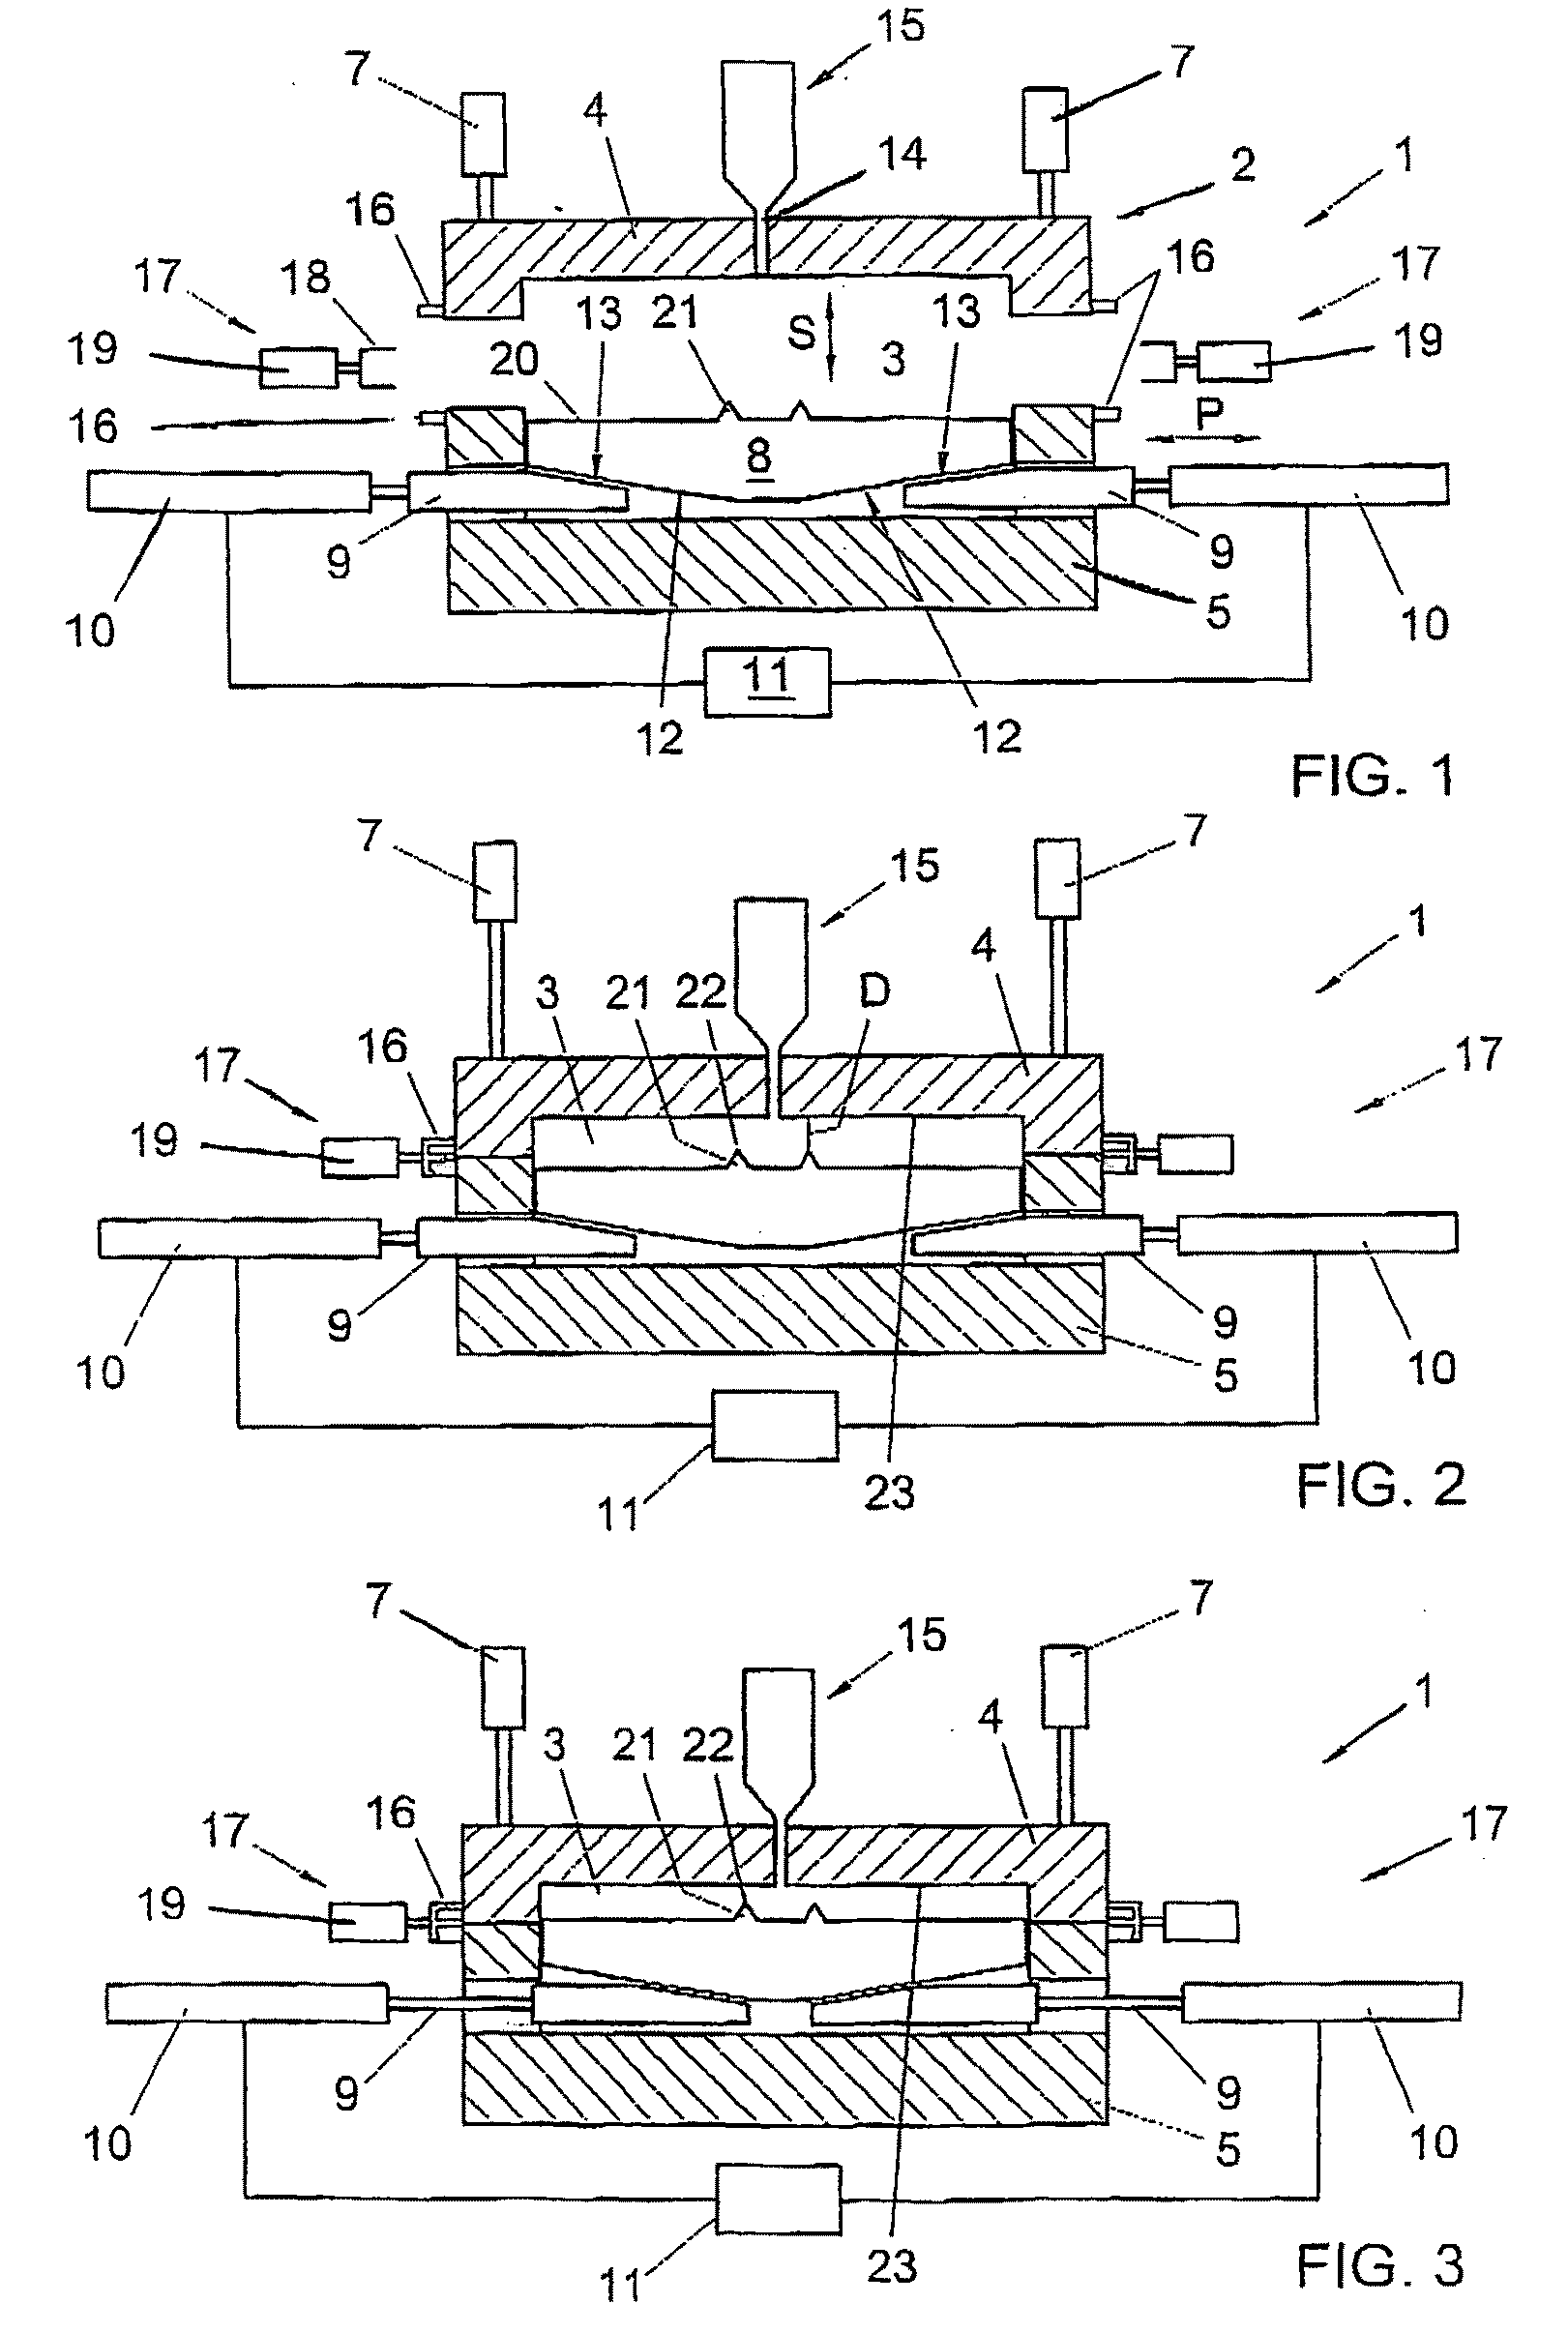 Apparatus and method for manufacturing products from a thermoplastic mass